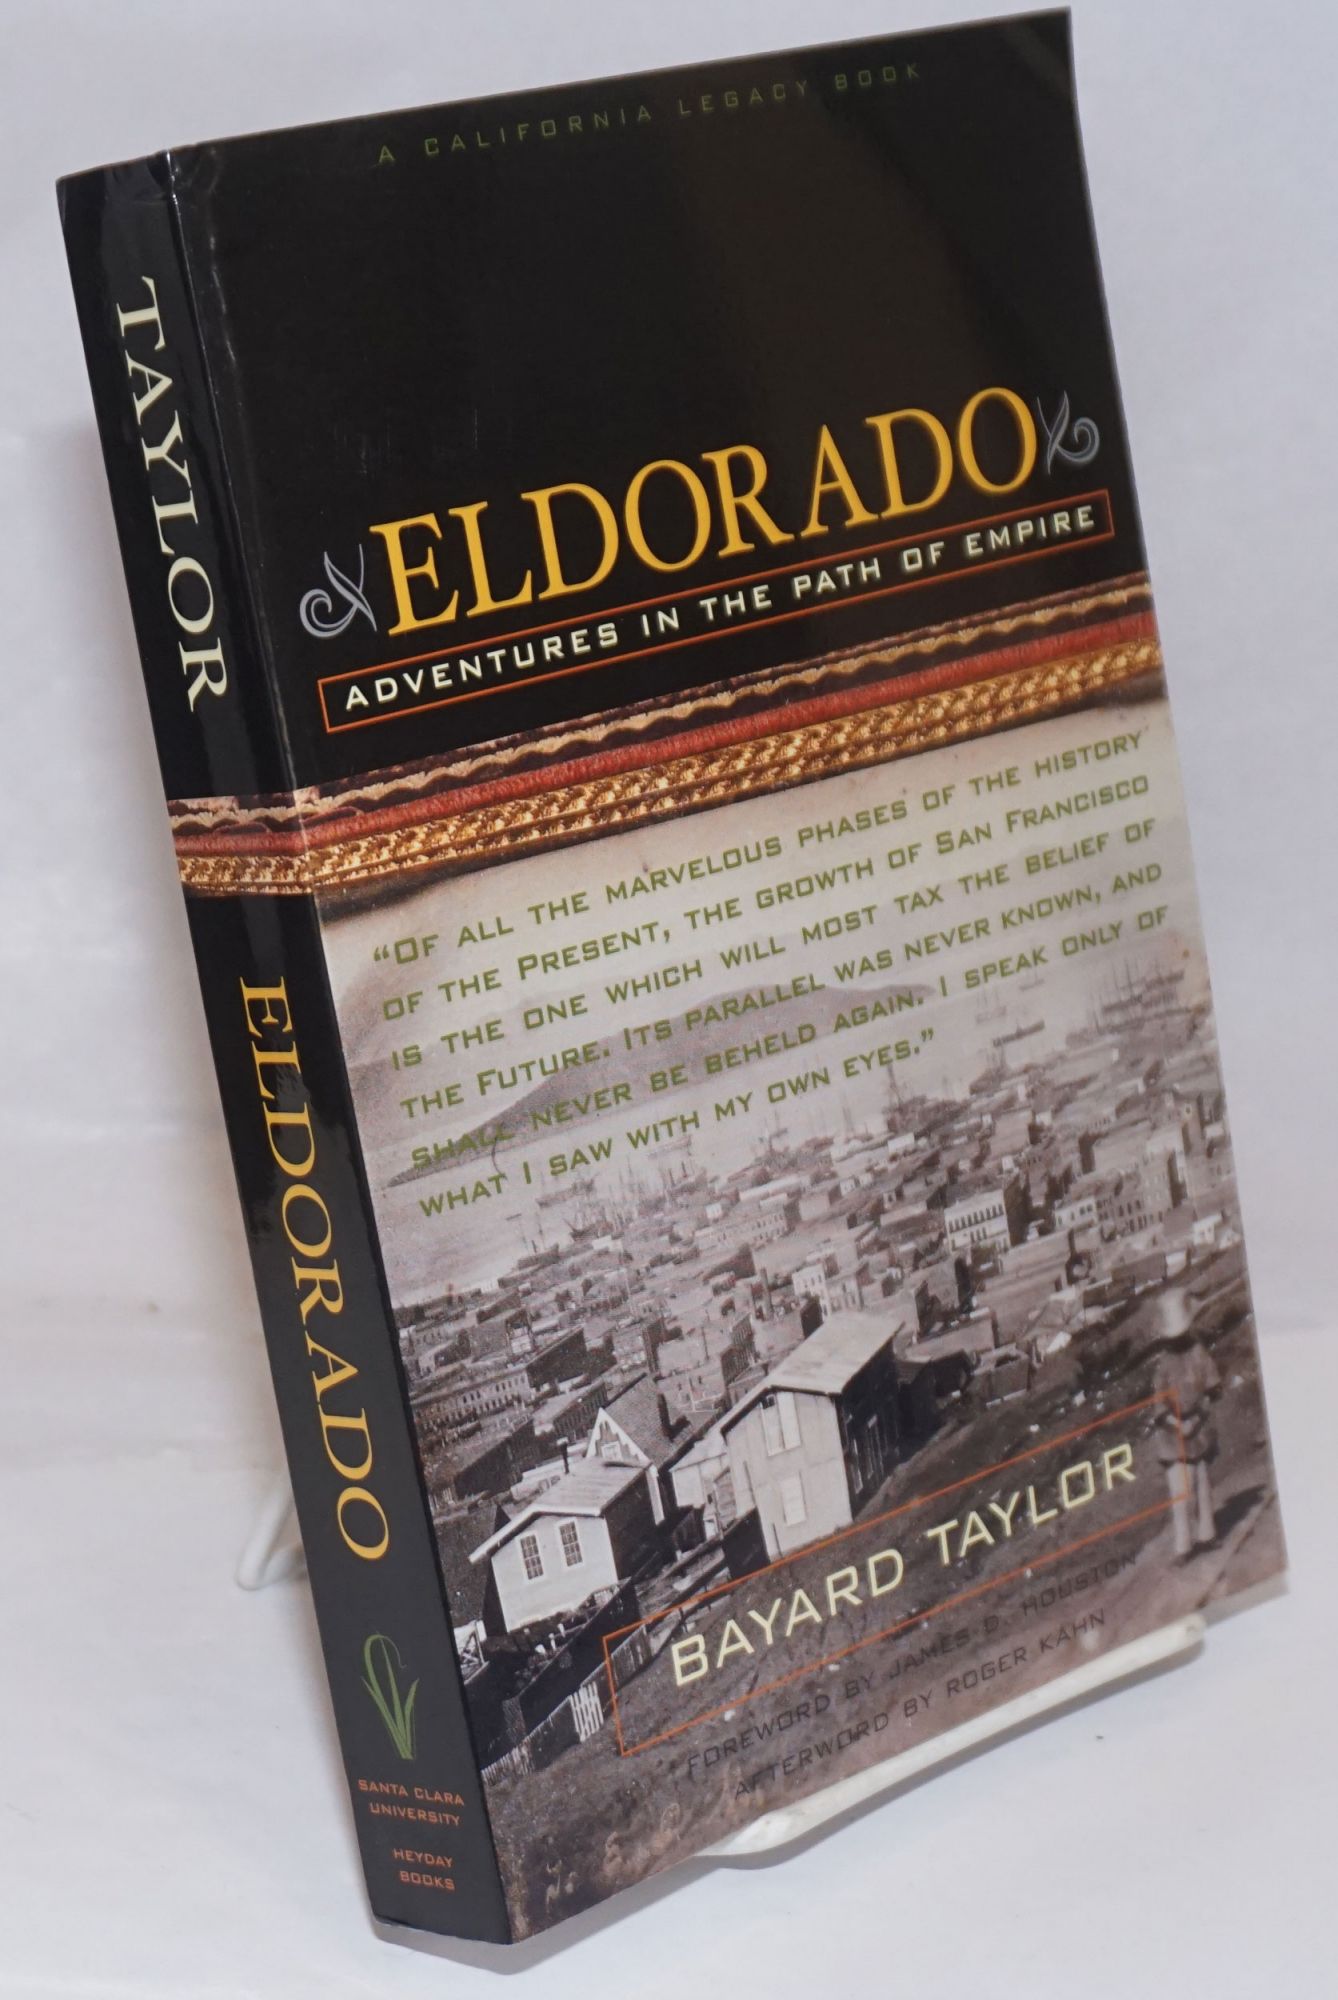 El Dorado, Adventures in the Path of Empire. Foreword by James D. Houston, Afterword by Roger Kahn - Taylor, Bayard. James D. Houston, Roger Kahn, contributions